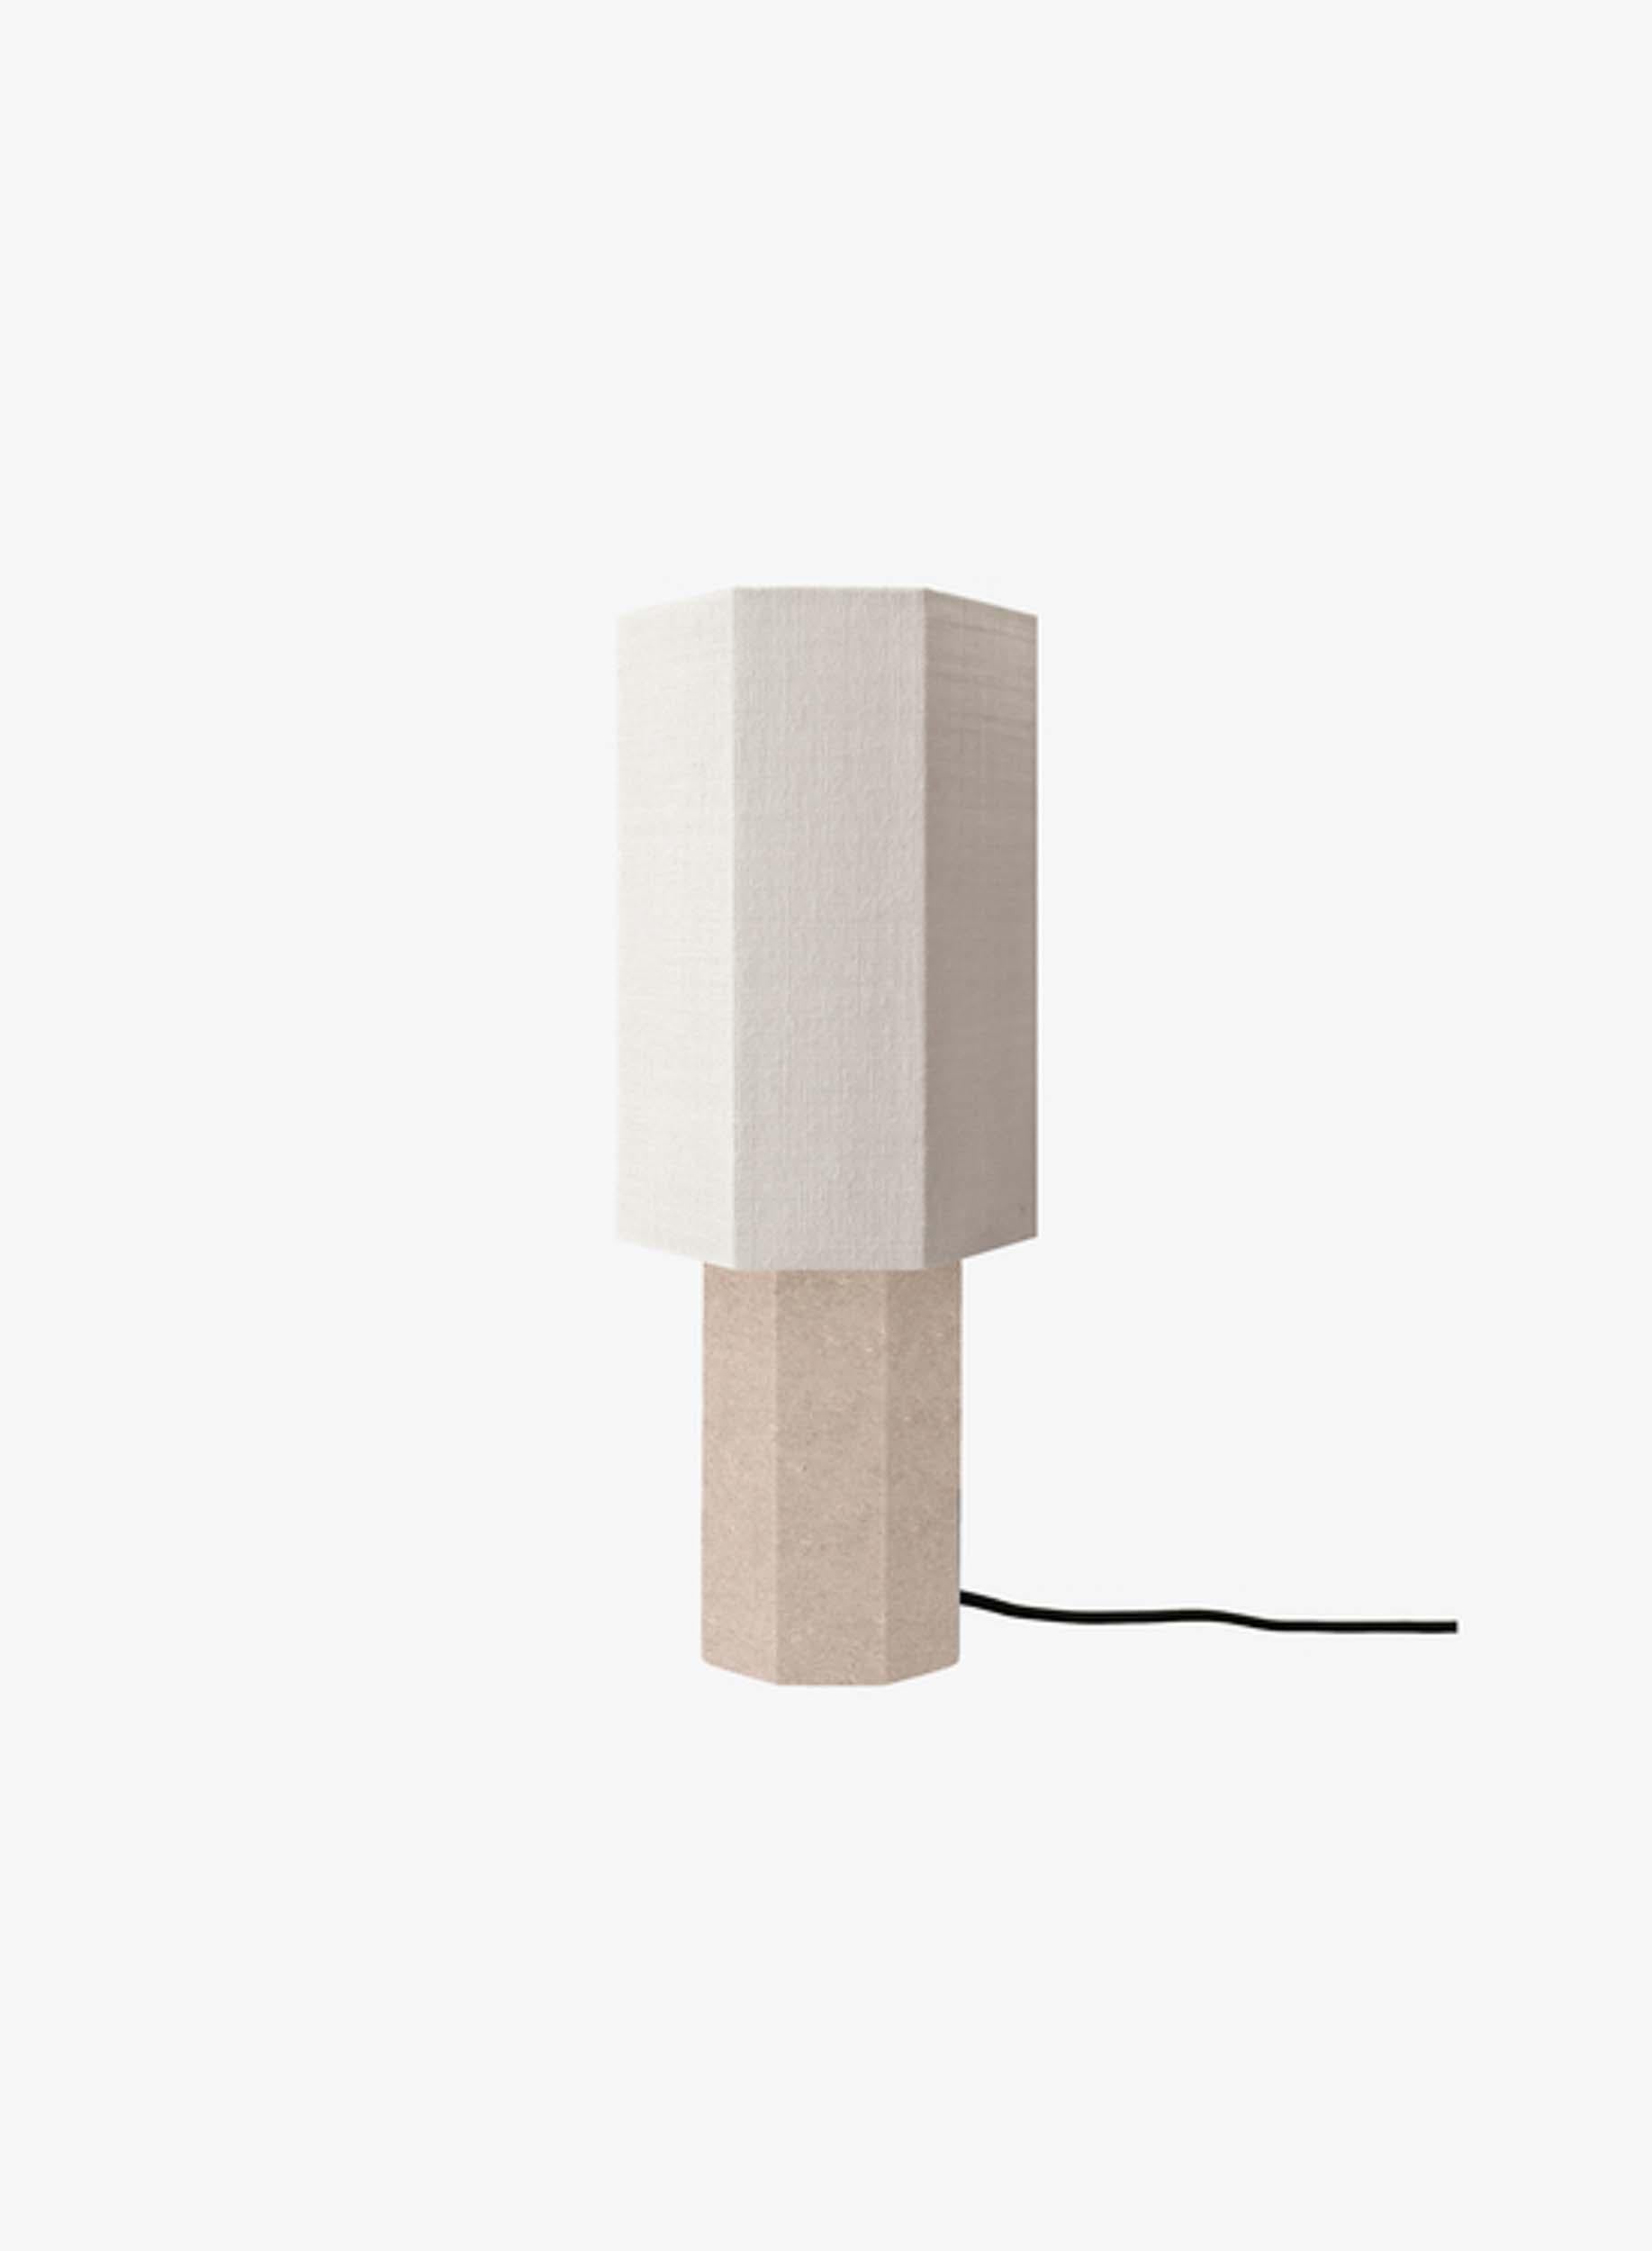 Table lamp 'The Eight over Eight' by Louise Roe 

Designed in Denmark and manufactured in Italy.

Model shown in the picture: 
Base: Travertine
Lampshade: Jute white 

Dimensions : 
Height: 36 cm
Diameter: 12.5 cm

Louise Roe is a